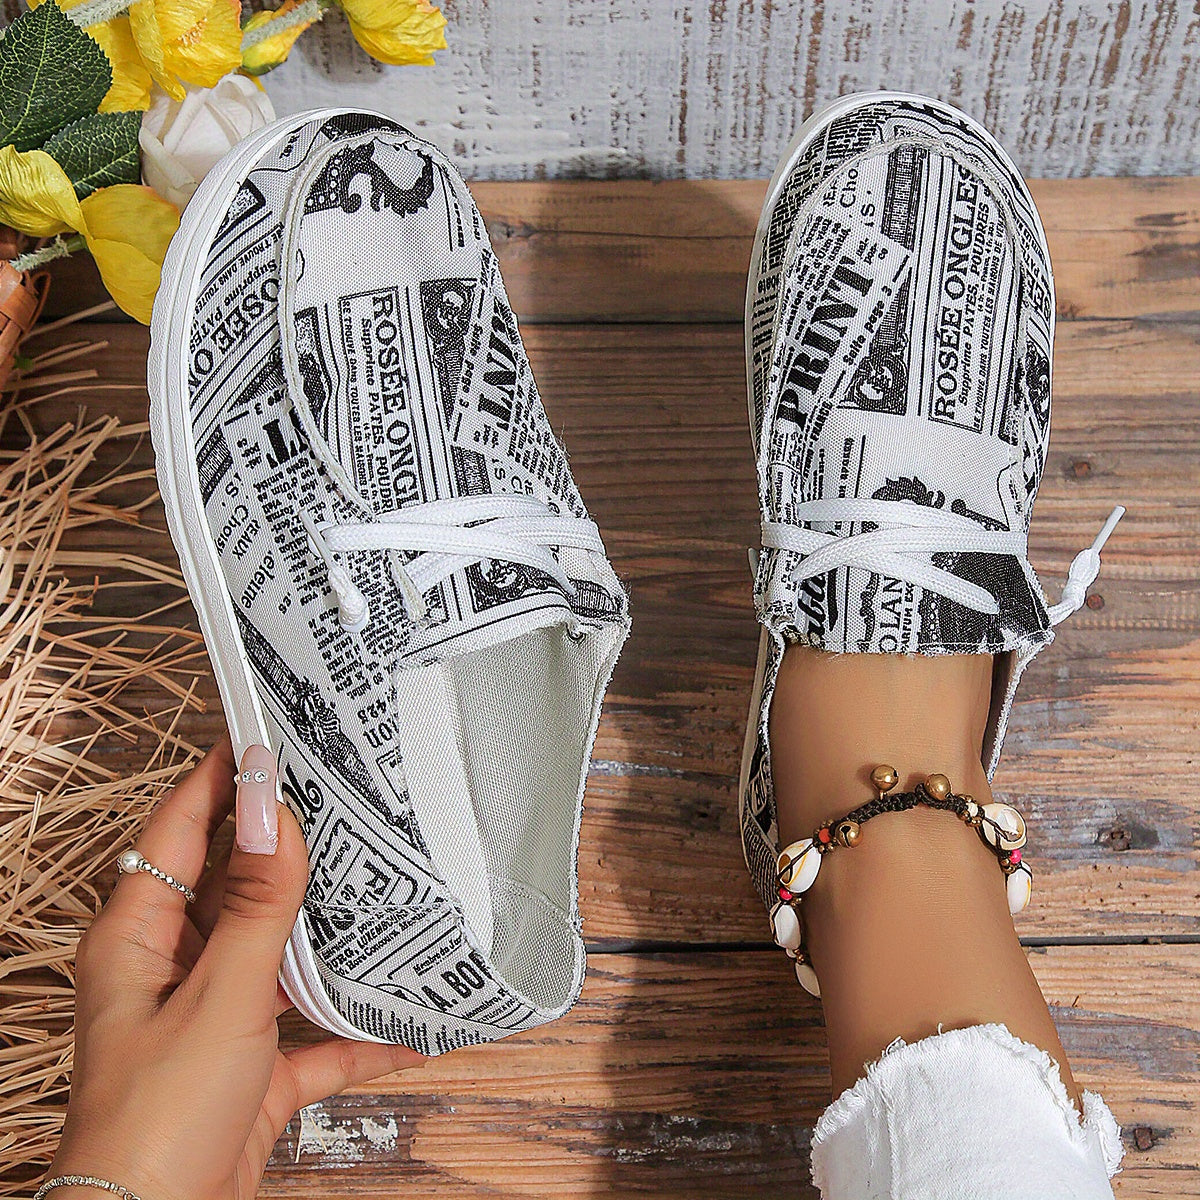 Women's Letter Print Canvas Shoes, Casual Lace Up Outdoor Sneakers, Lightweight Low Top Walking Shoes